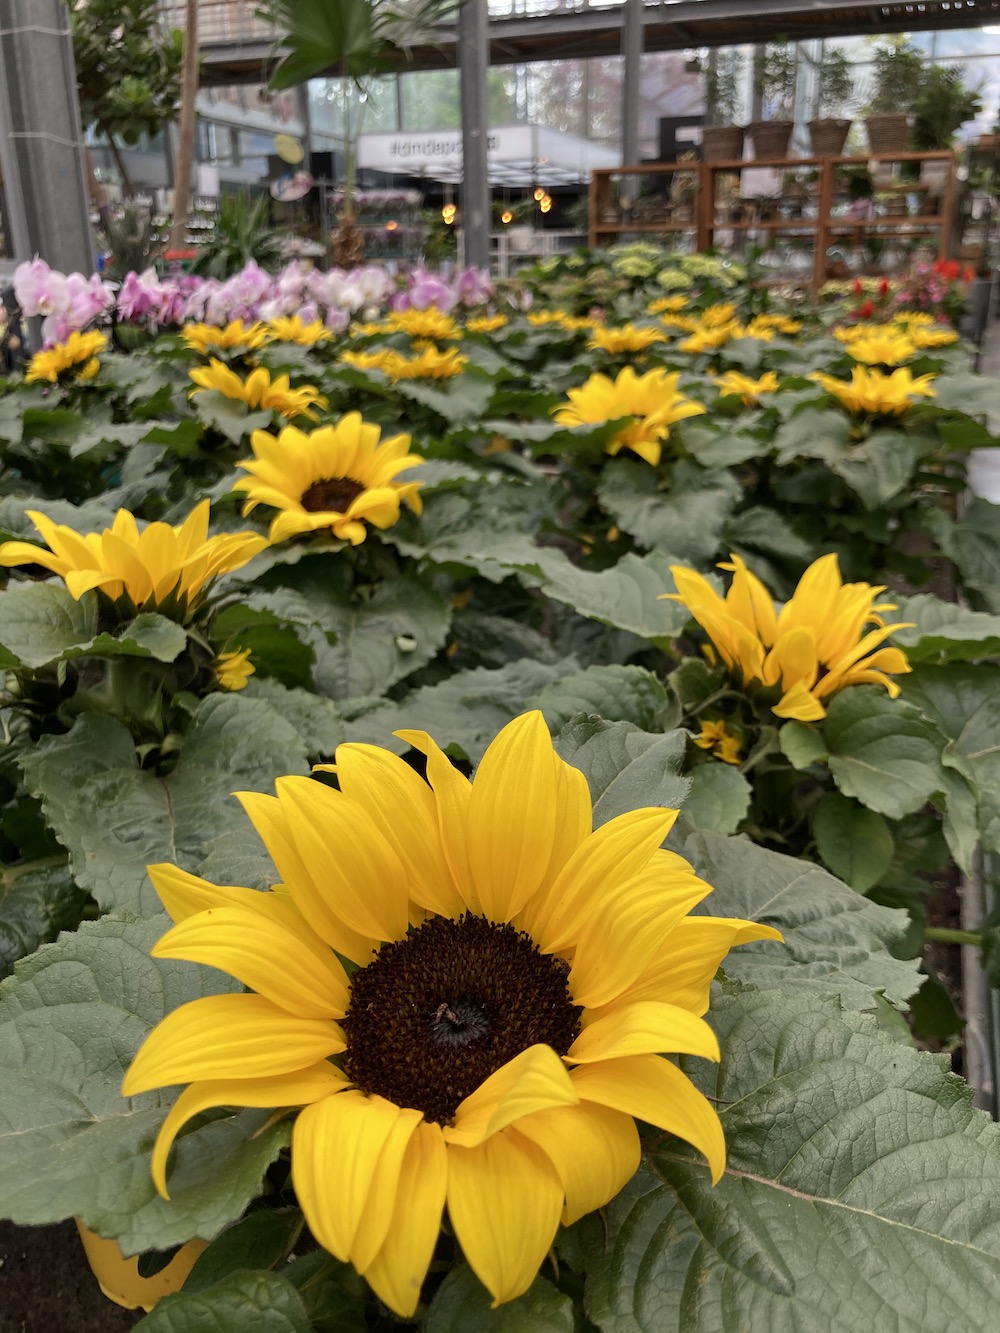 Helianthus Season - Everything You Need to Know About Sunflowers006